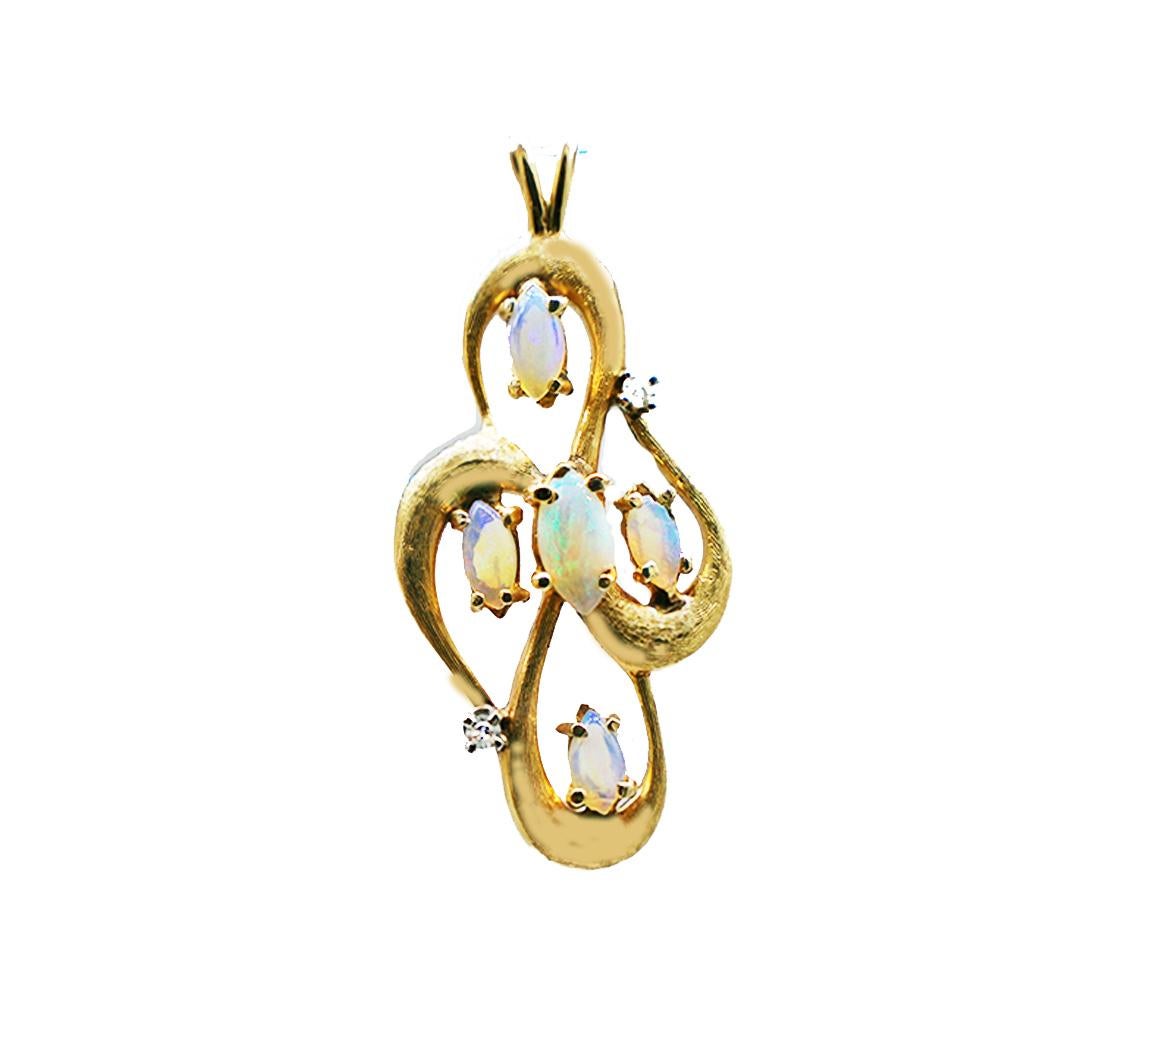 Large Opal Freeform Diamond Pendant. 
 gold pendant weighing 5.6 grams of 14 karat yellow gold features colorful marquise shaped opals. The stone are measuring 6.00-7.5 mm in length and have exciting colors as you move the pendant to the lighting